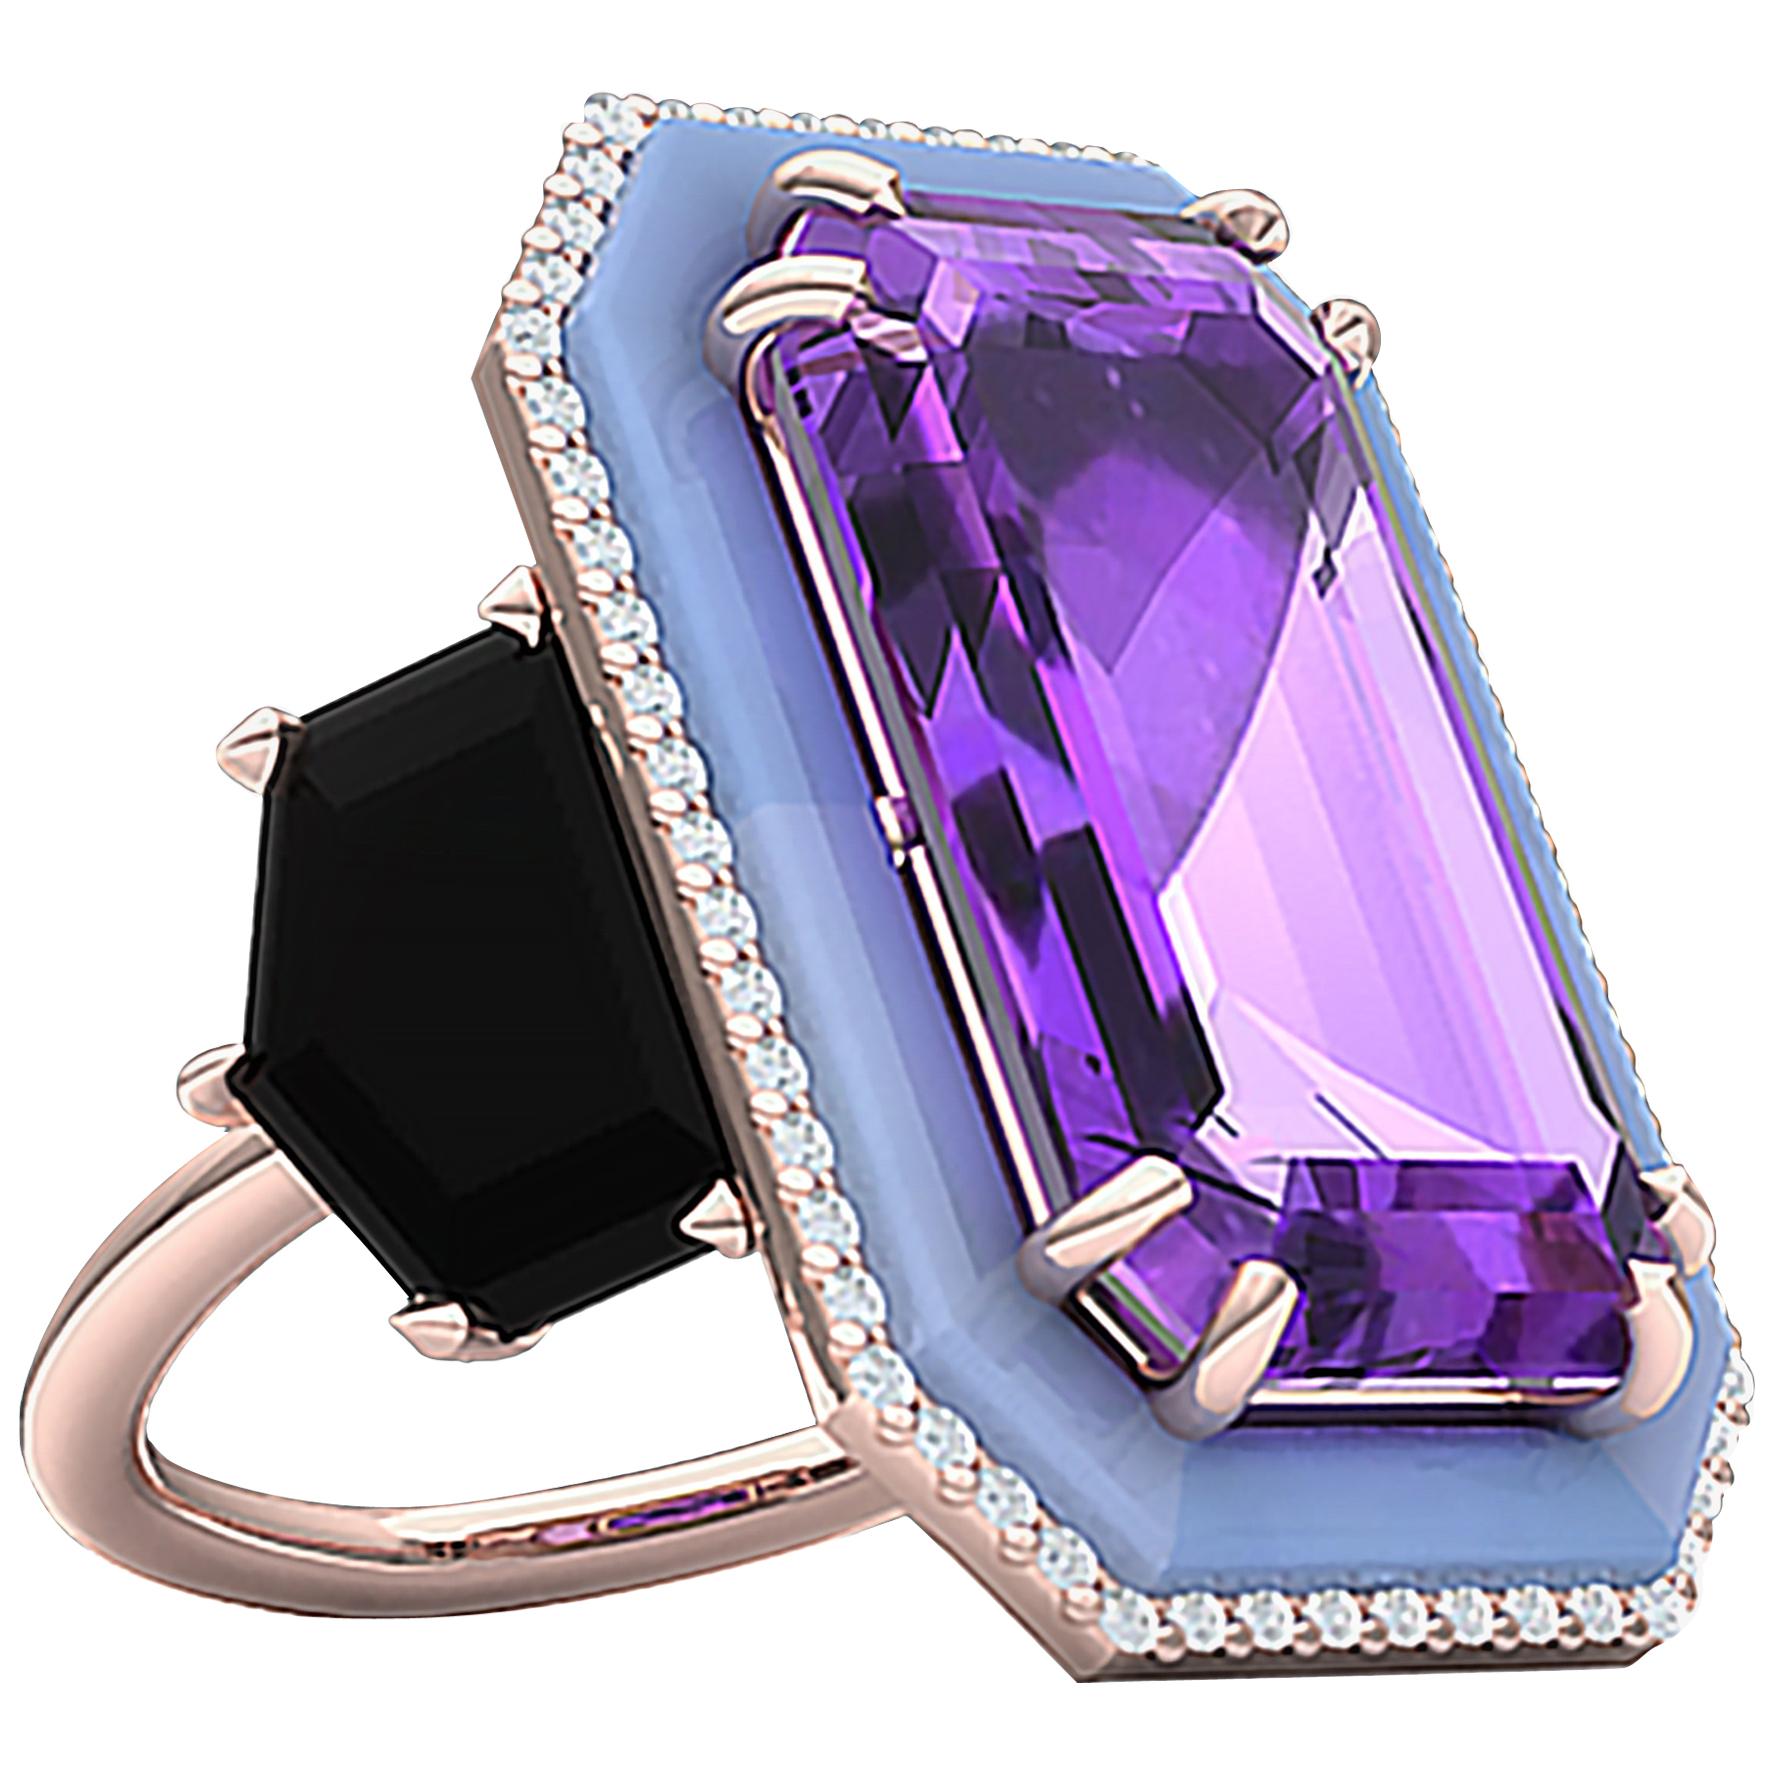 10 Carat Amethyst Onyx Diamond and Enamel Rose Gold Cocktail Ring For Sale